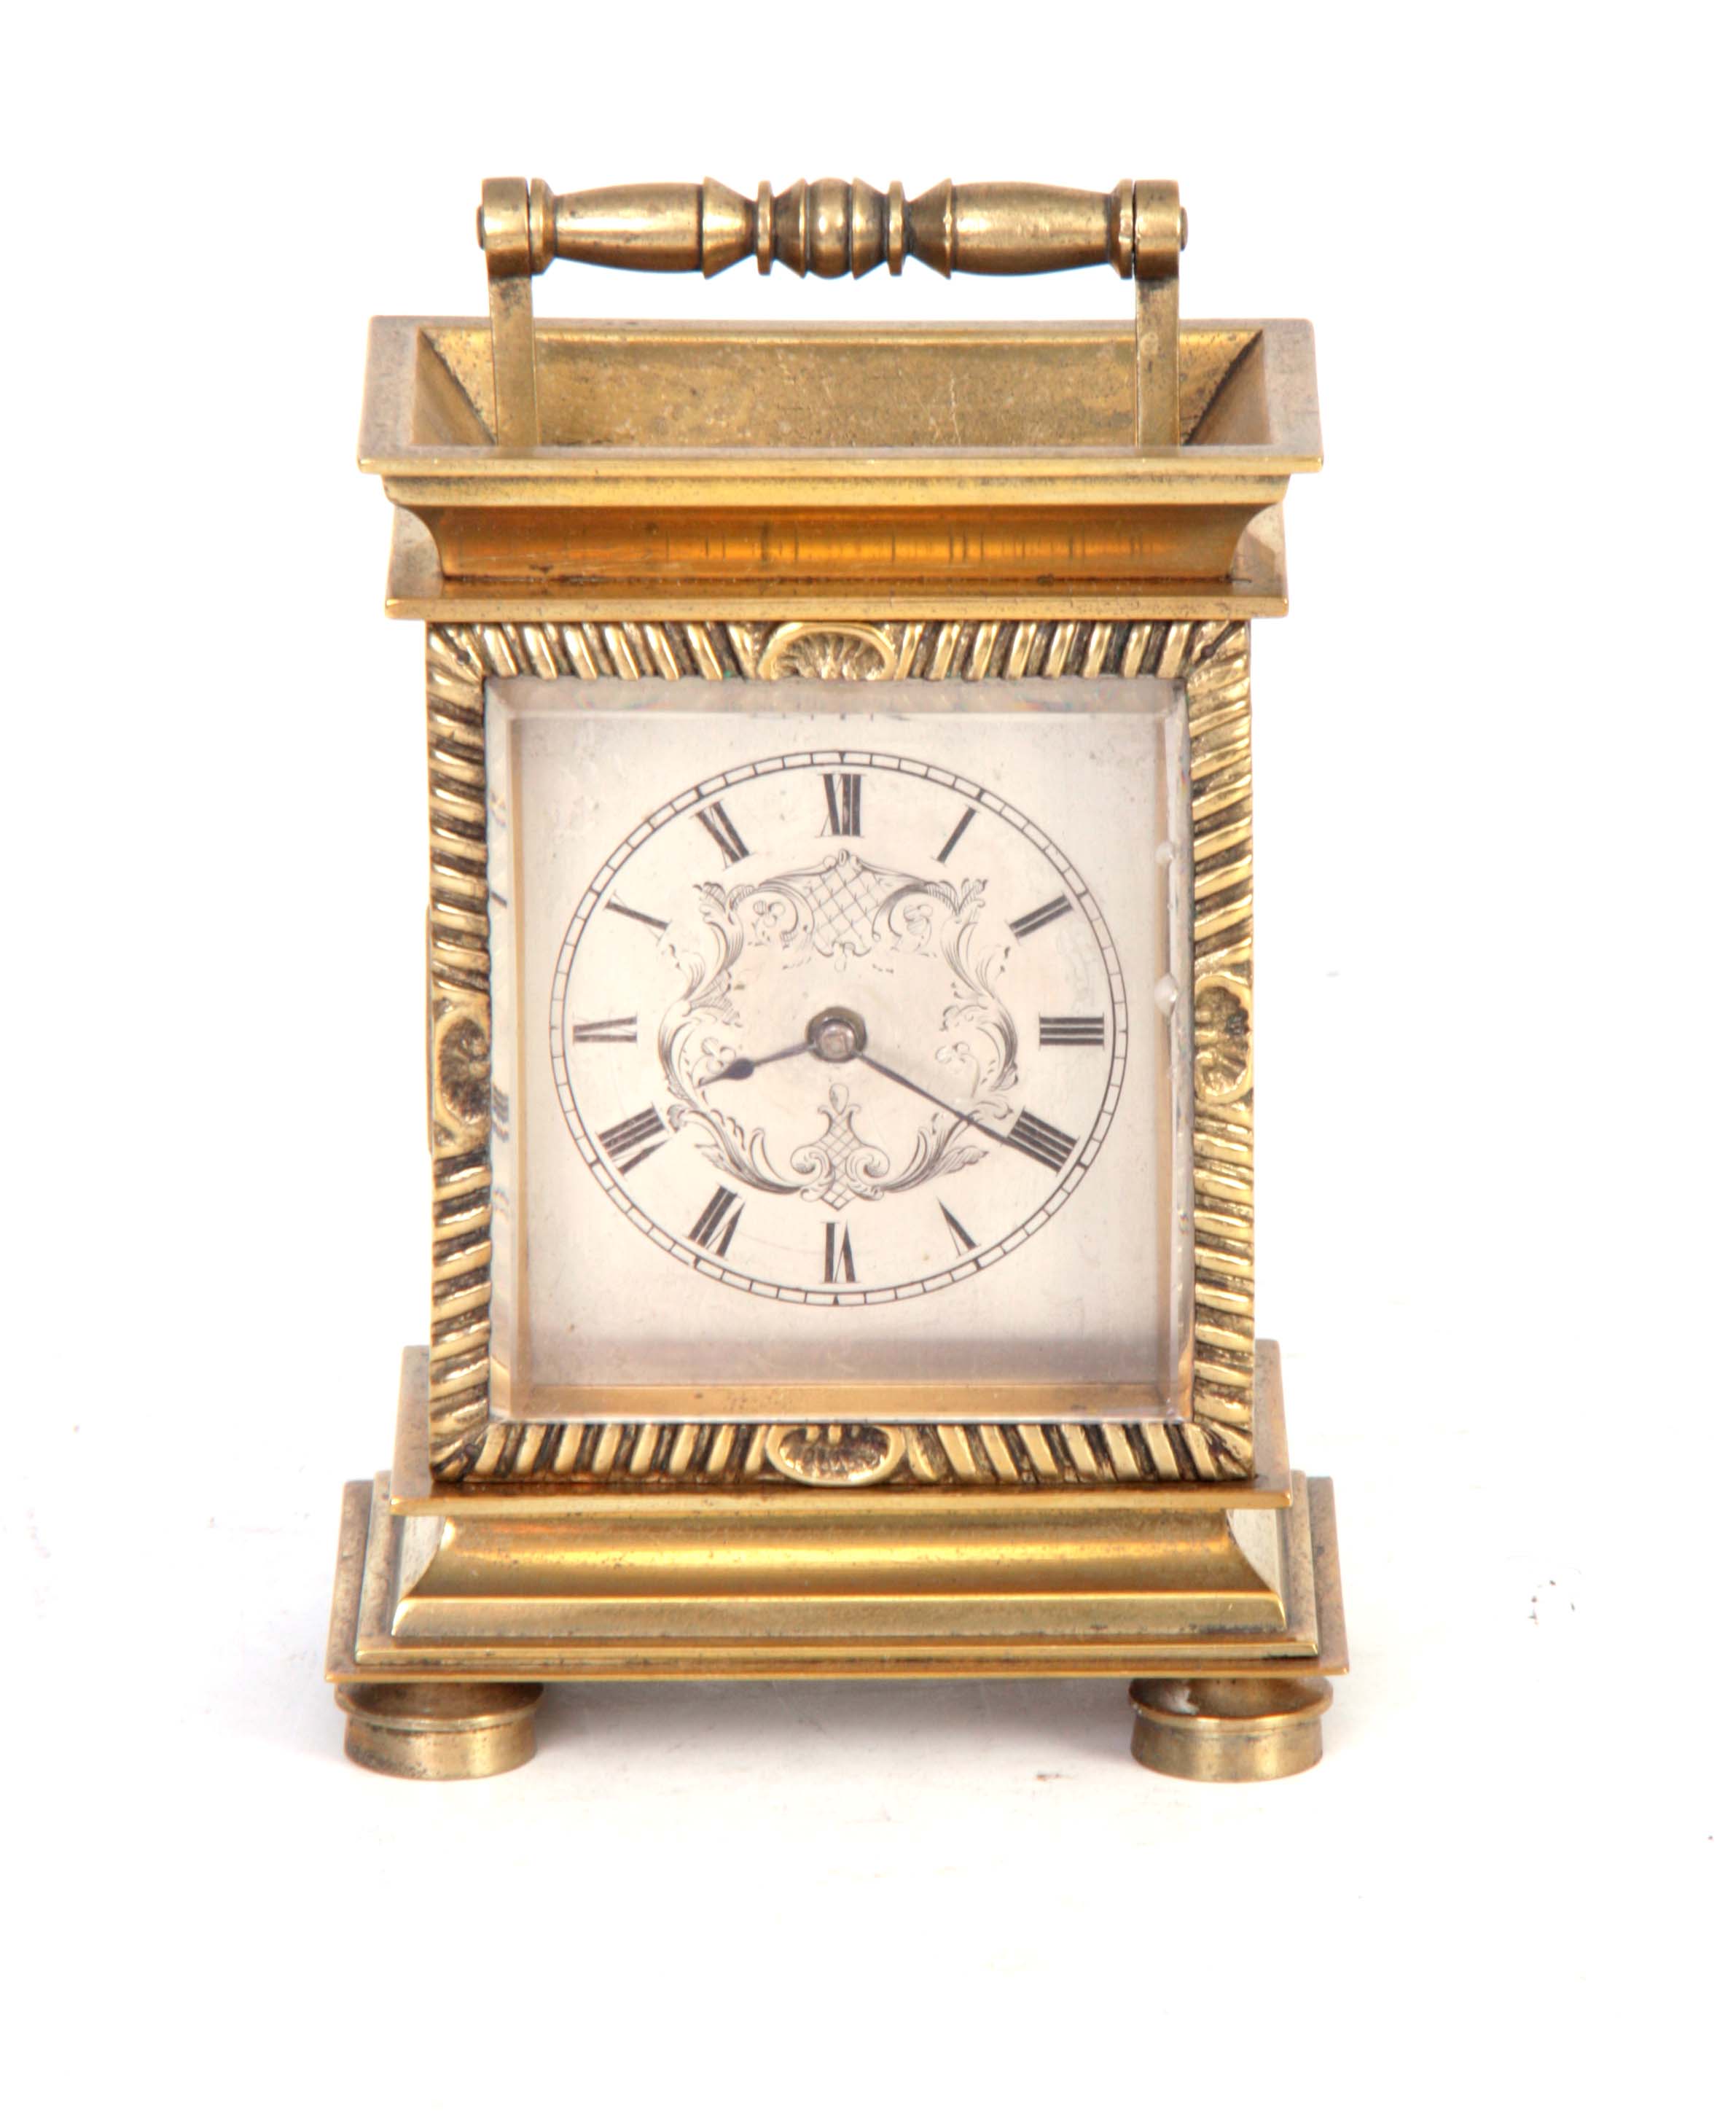 THOMAS MASTON, LONDON AN EARLY 19TH CENTURY ENGLISH CARRIAGE CLOCK having a brass moulded case